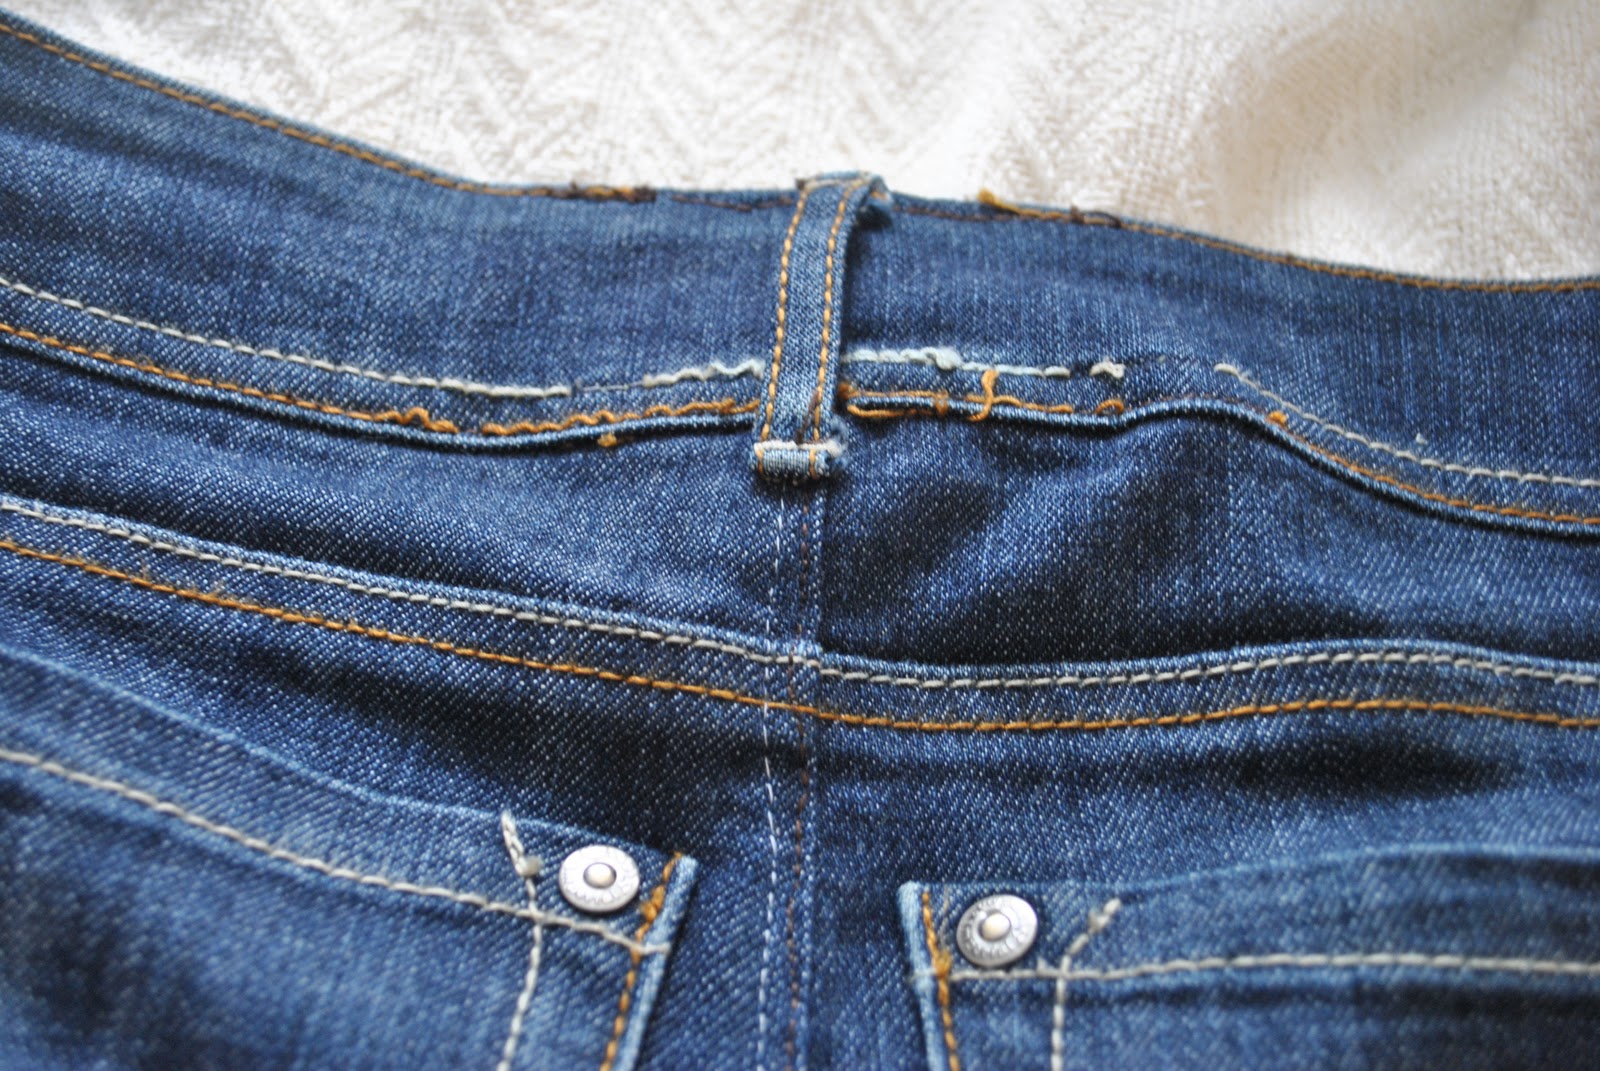 Janky Cantankerous: Tutorial: Making jeans smaller in the waist